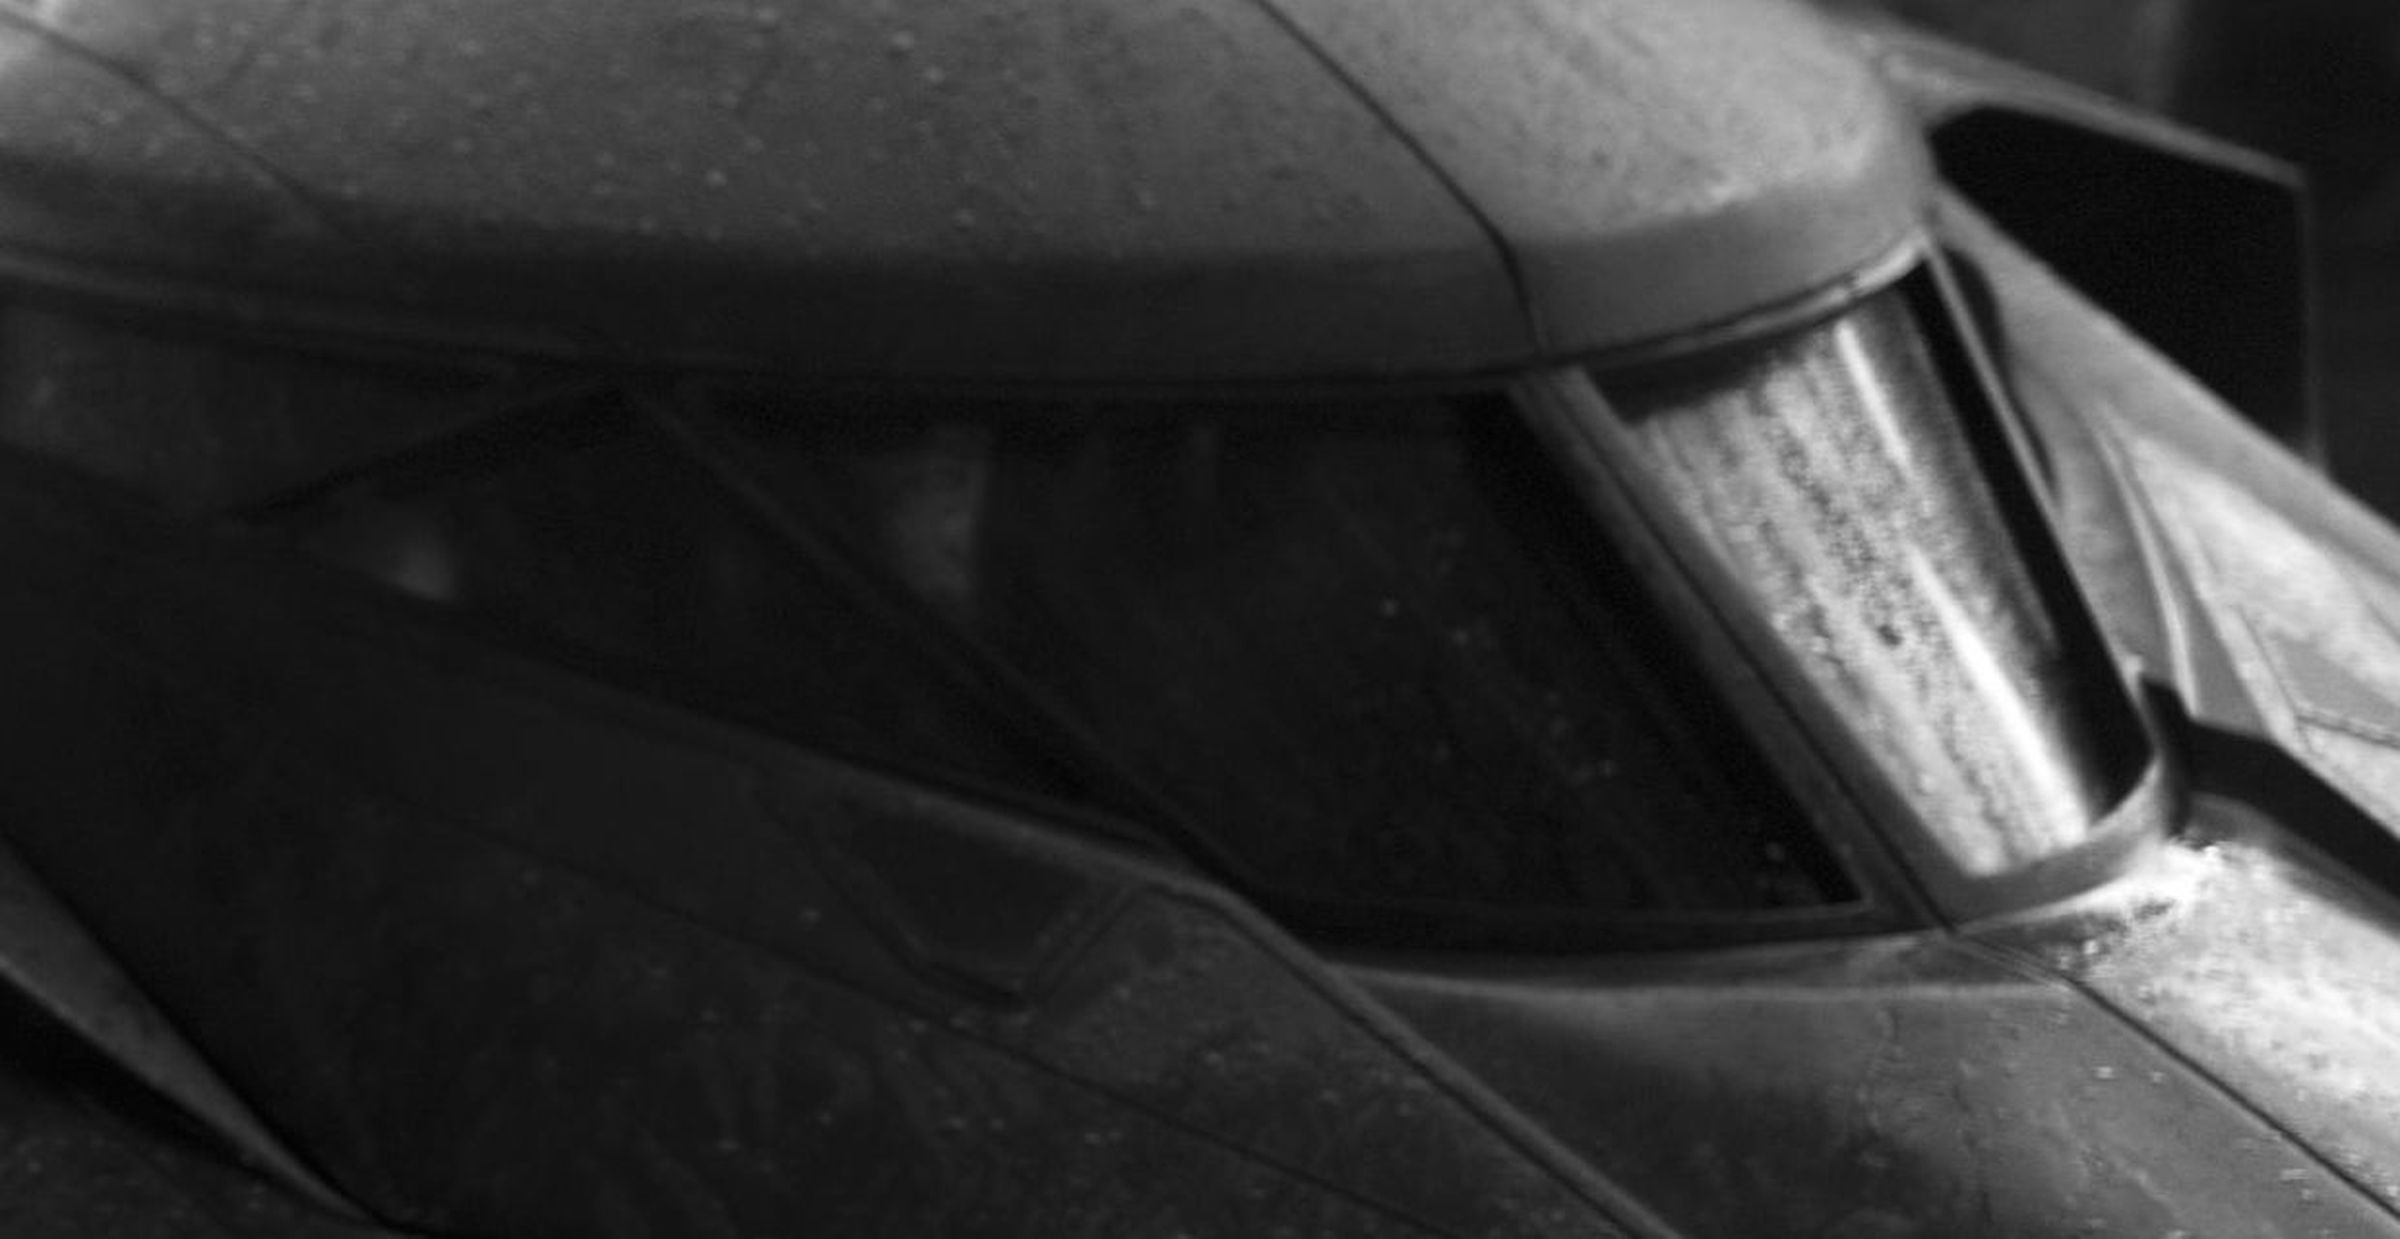 High-res details of Batman and the new Batmobile